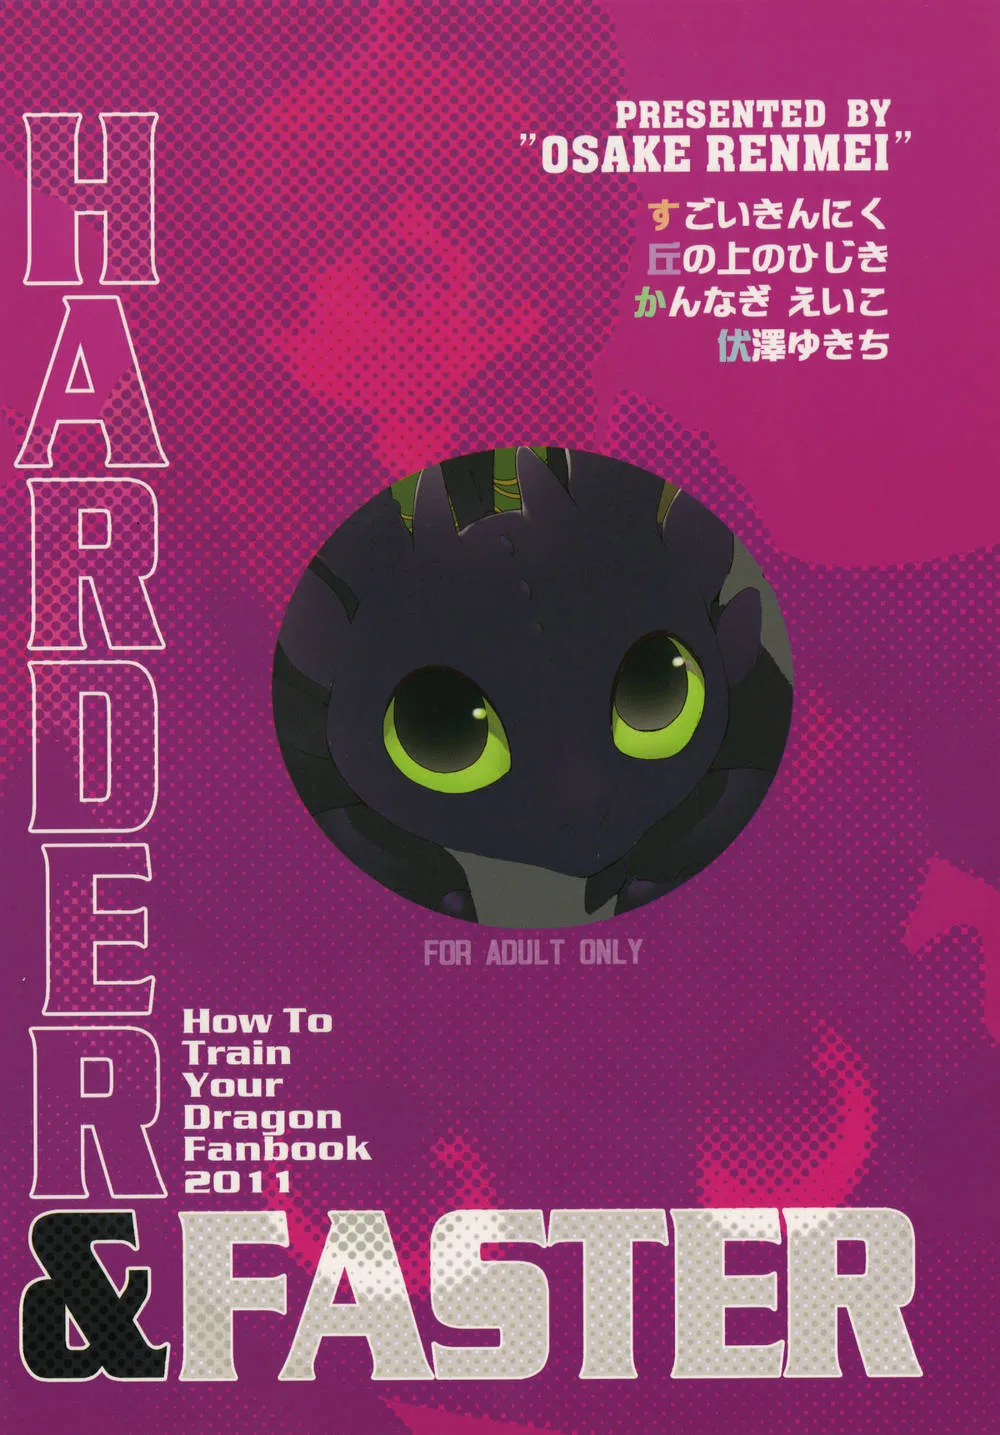 How To Train Your Dragon,HARDER & FASTER [Japanese][第46页]